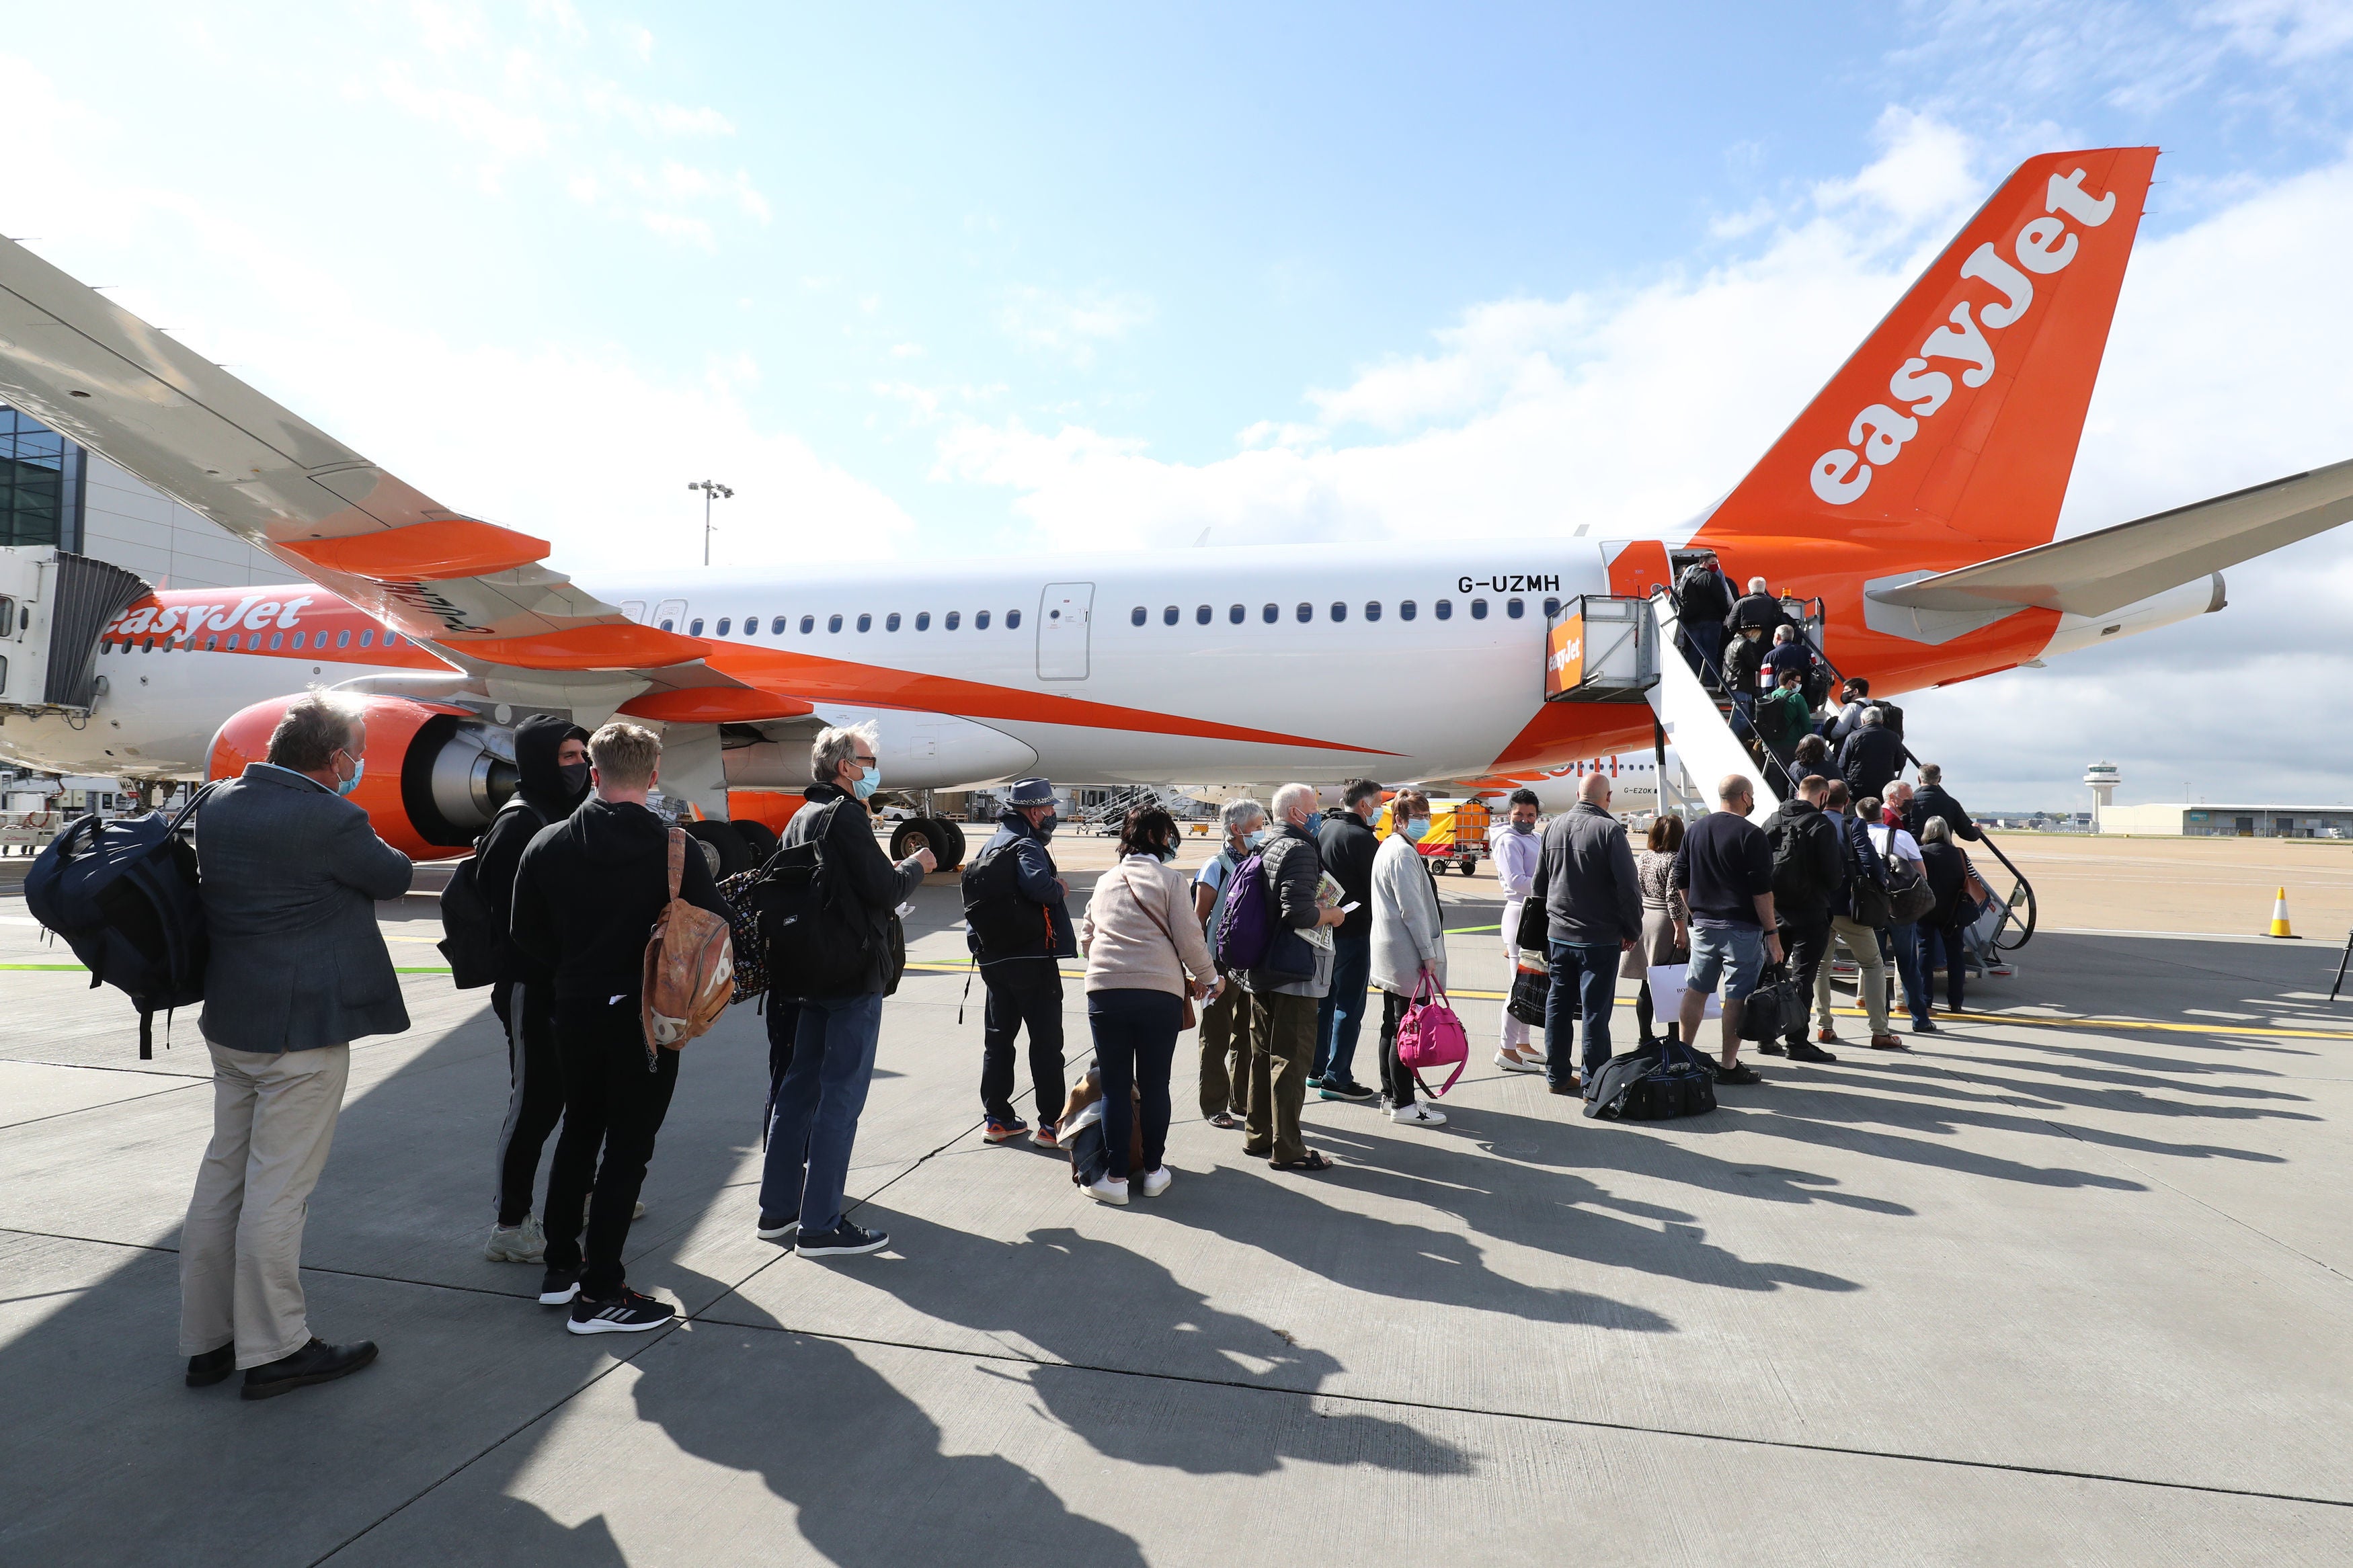 EasyJet’s first requirement after cancelling is to offer you an alternative flight